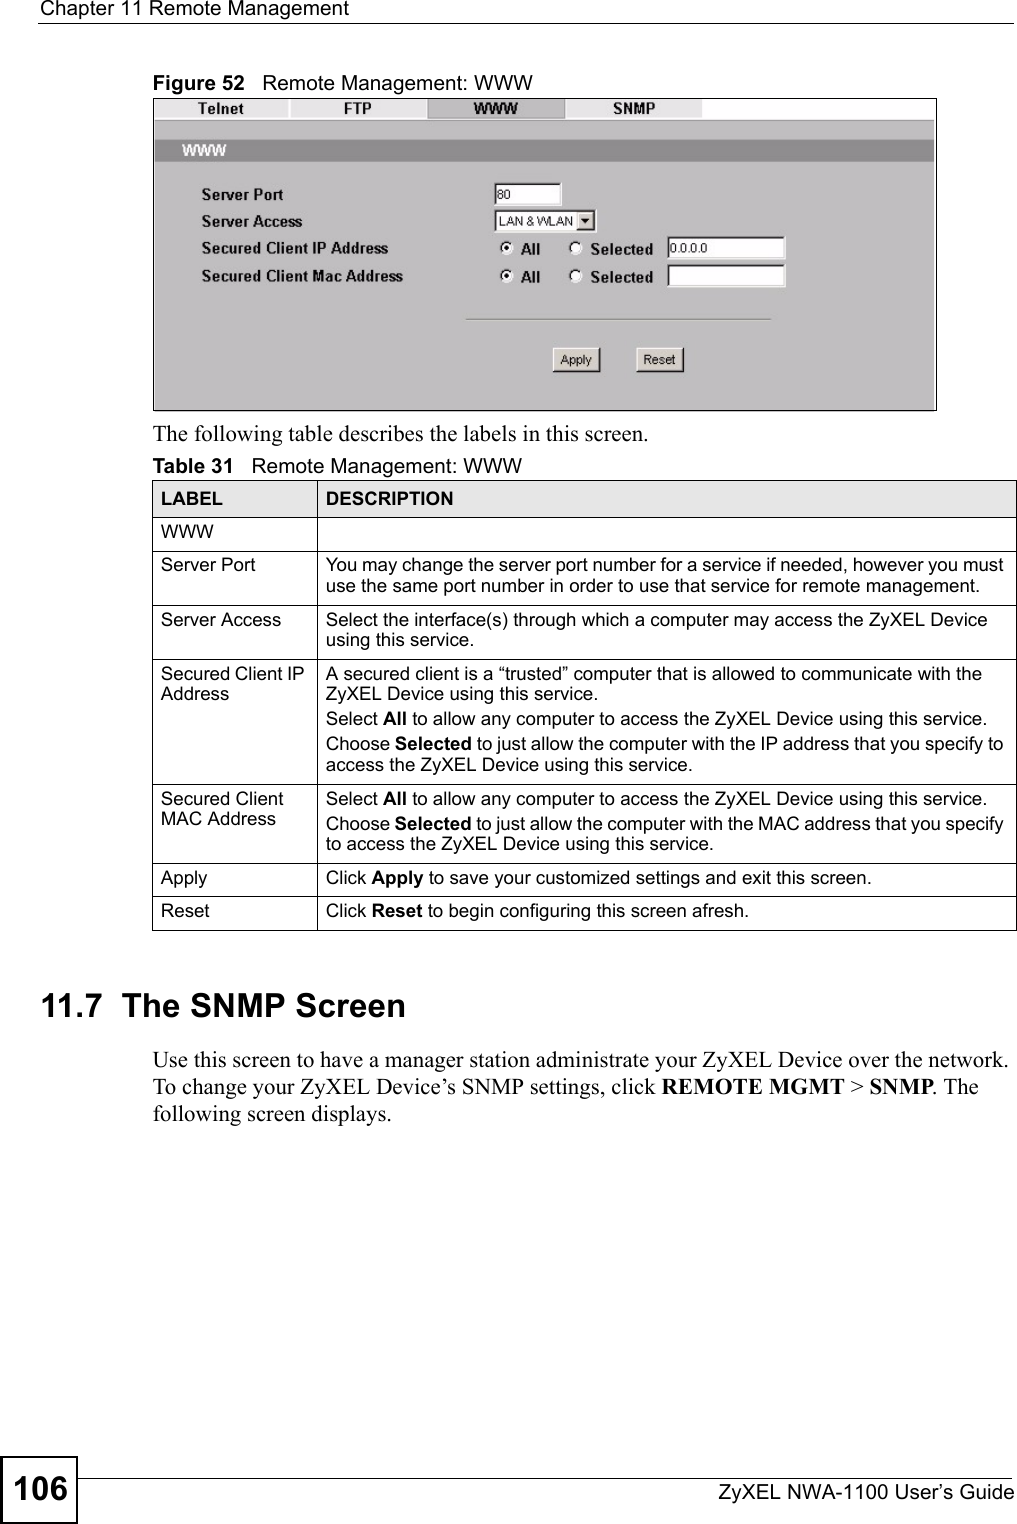 Chapter 11 Remote ManagementZyXEL NWA-1100 User’s Guide106Figure 52   Remote Management: WWWThe following table describes the labels in this screen.11.7  The SNMP ScreenUse this screen to have a manager station administrate your ZyXEL Device over the network. To change your ZyXEL Device’s SNMP settings, click REMOTE MGMT &gt; SNMP. The following screen displays.Table 31   Remote Management: WWWLABEL DESCRIPTIONWWWServer Port You may change the server port number for a service if needed, however you must use the same port number in order to use that service for remote management.Server Access Select the interface(s) through which a computer may access the ZyXEL Device using this service.Secured Client IP AddressA secured client is a “trusted” computer that is allowed to communicate with the ZyXEL Device using this service. Select All to allow any computer to access the ZyXEL Device using this service.Choose Selected to just allow the computer with the IP address that you specify to access the ZyXEL Device using this service.Secured Client MAC AddressSelect All to allow any computer to access the ZyXEL Device using this service.Choose Selected to just allow the computer with the MAC address that you specify to access the ZyXEL Device using this service.Apply Click Apply to save your customized settings and exit this screen. Reset Click Reset to begin configuring this screen afresh.